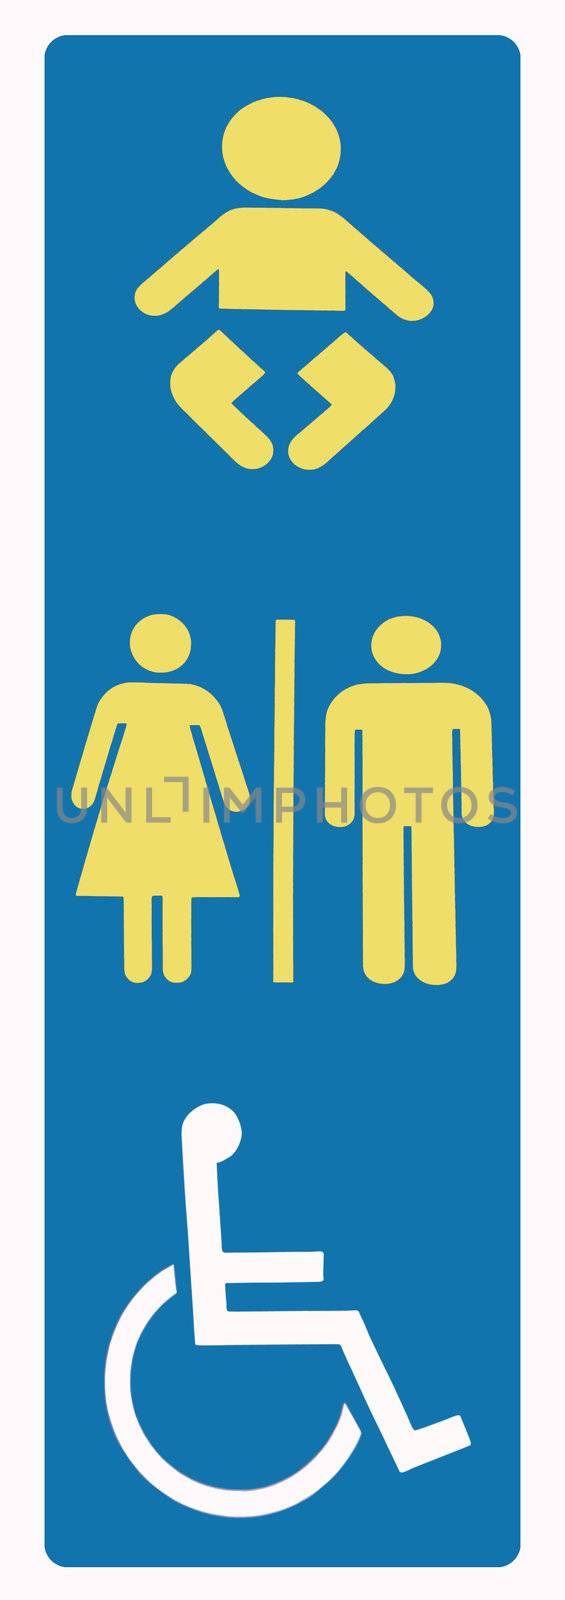 Restroom sign disabled by Claudine